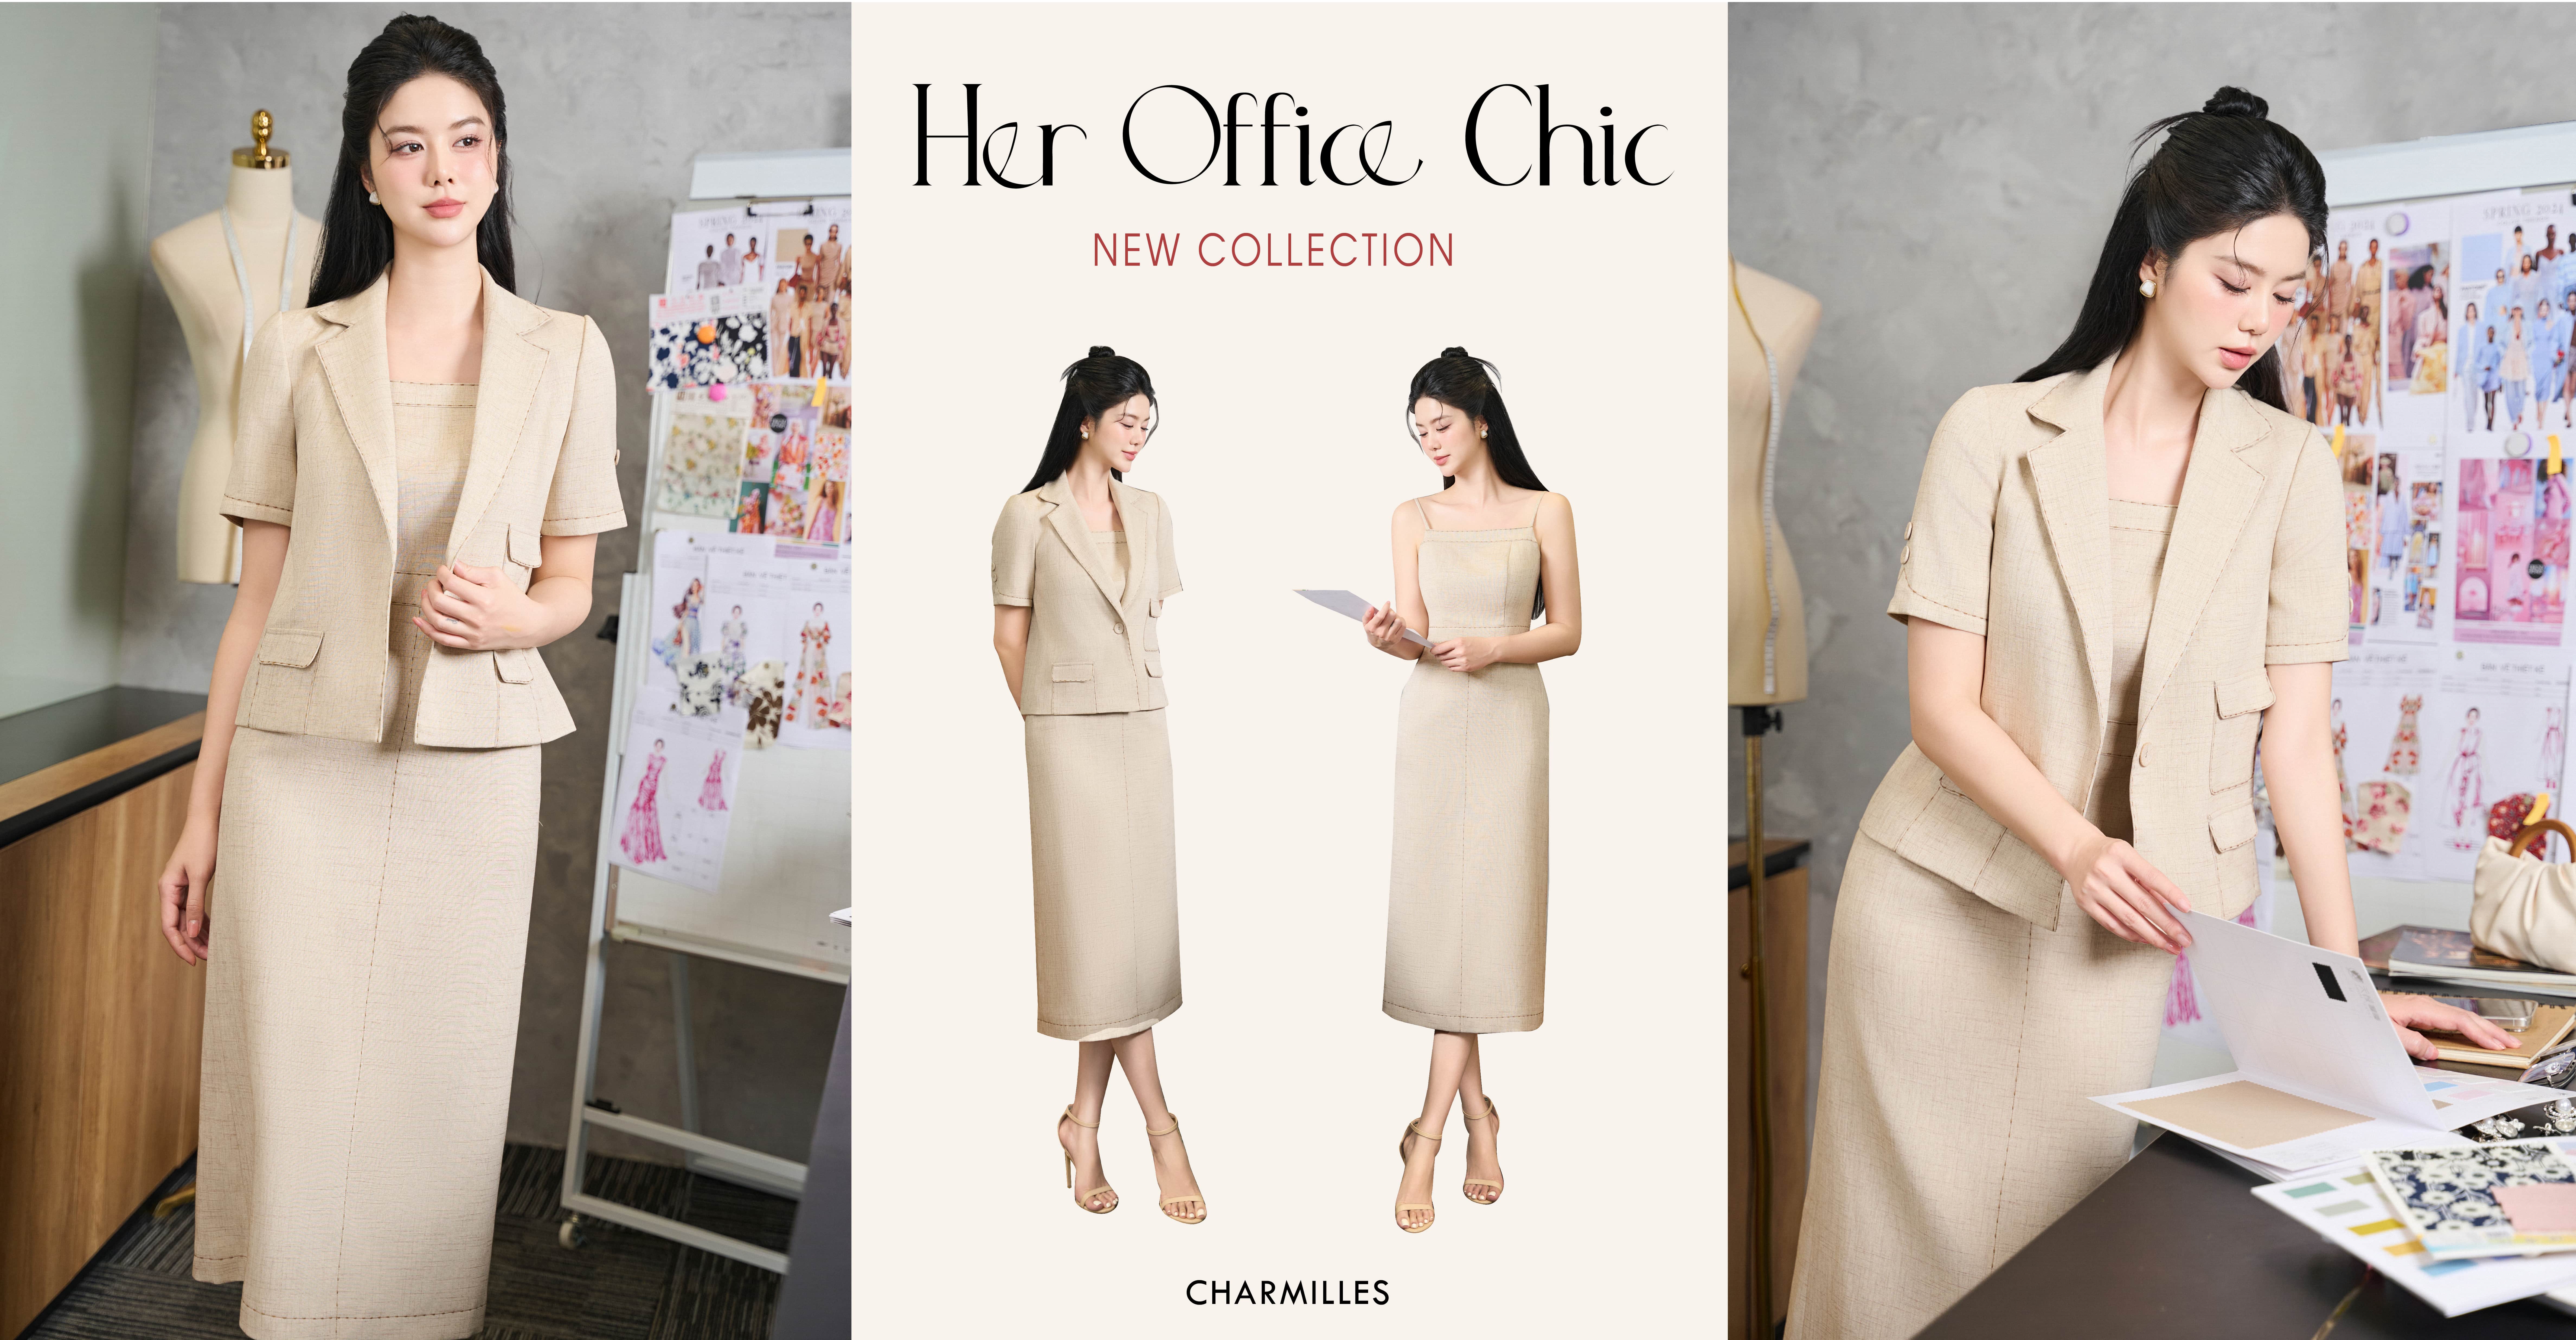 NEW COLLECTION - HER OFFICE CHIC